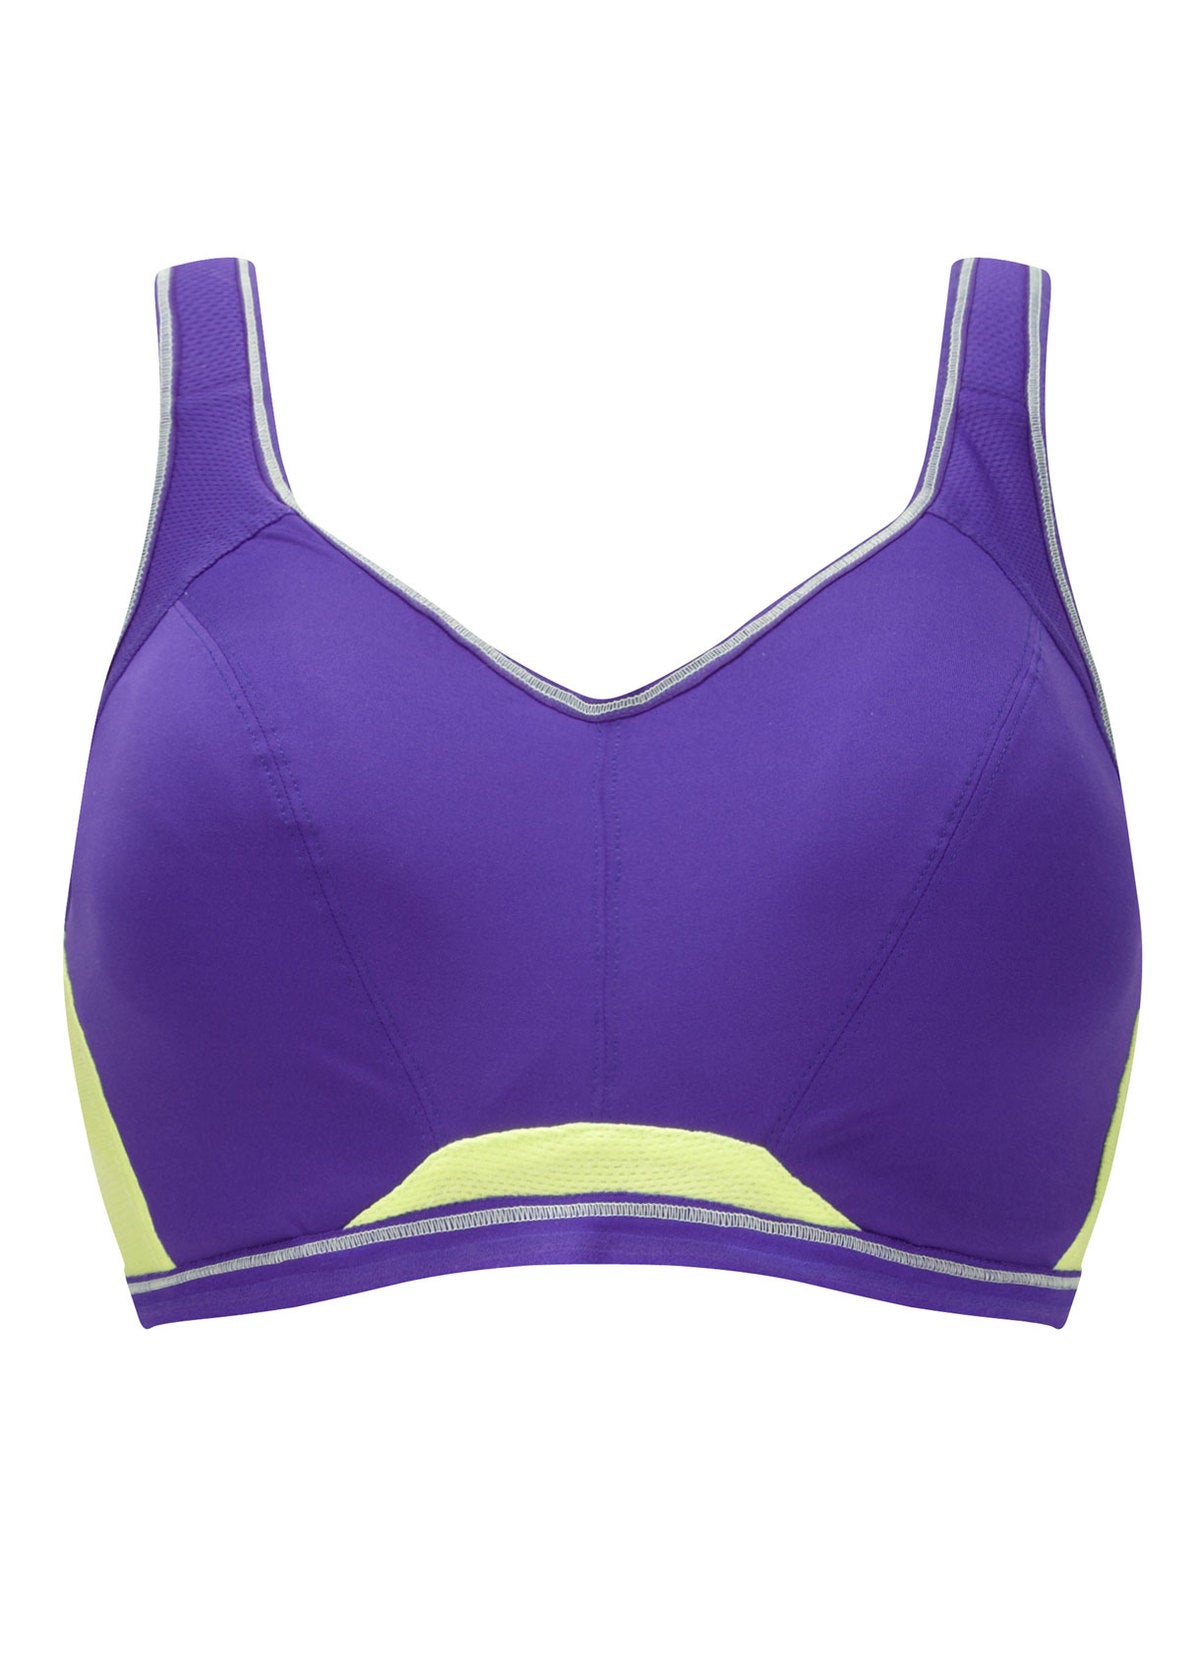 Bra Review - Freya Active Epic Moulded Crop Top Sports Bra (4004